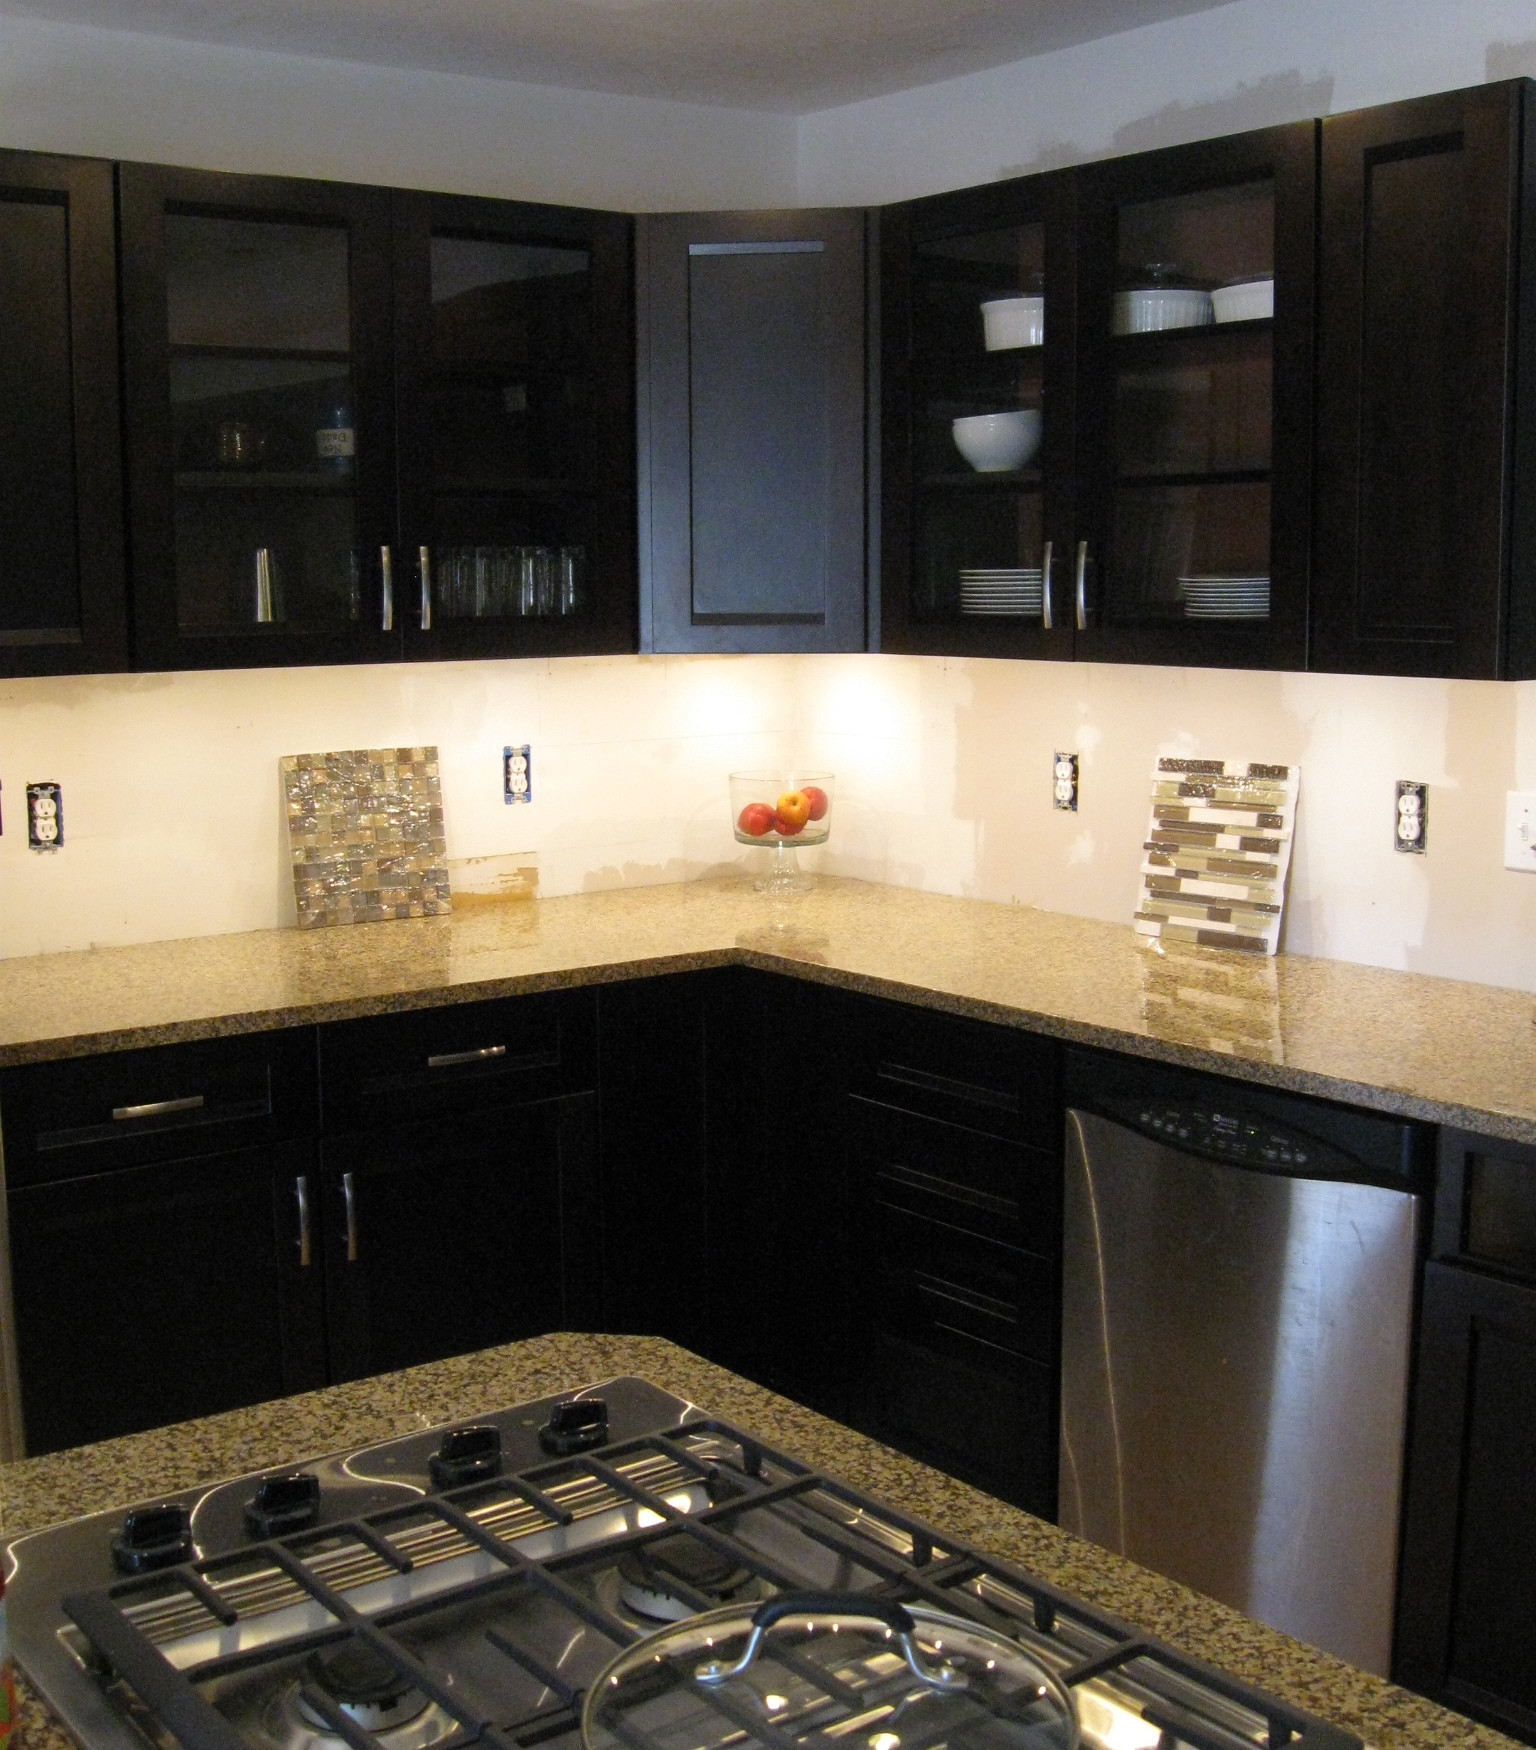 Led Lighting For Kitchen Cabinets
 High Power LED Under Cabinet Lighting DIY Great Looking